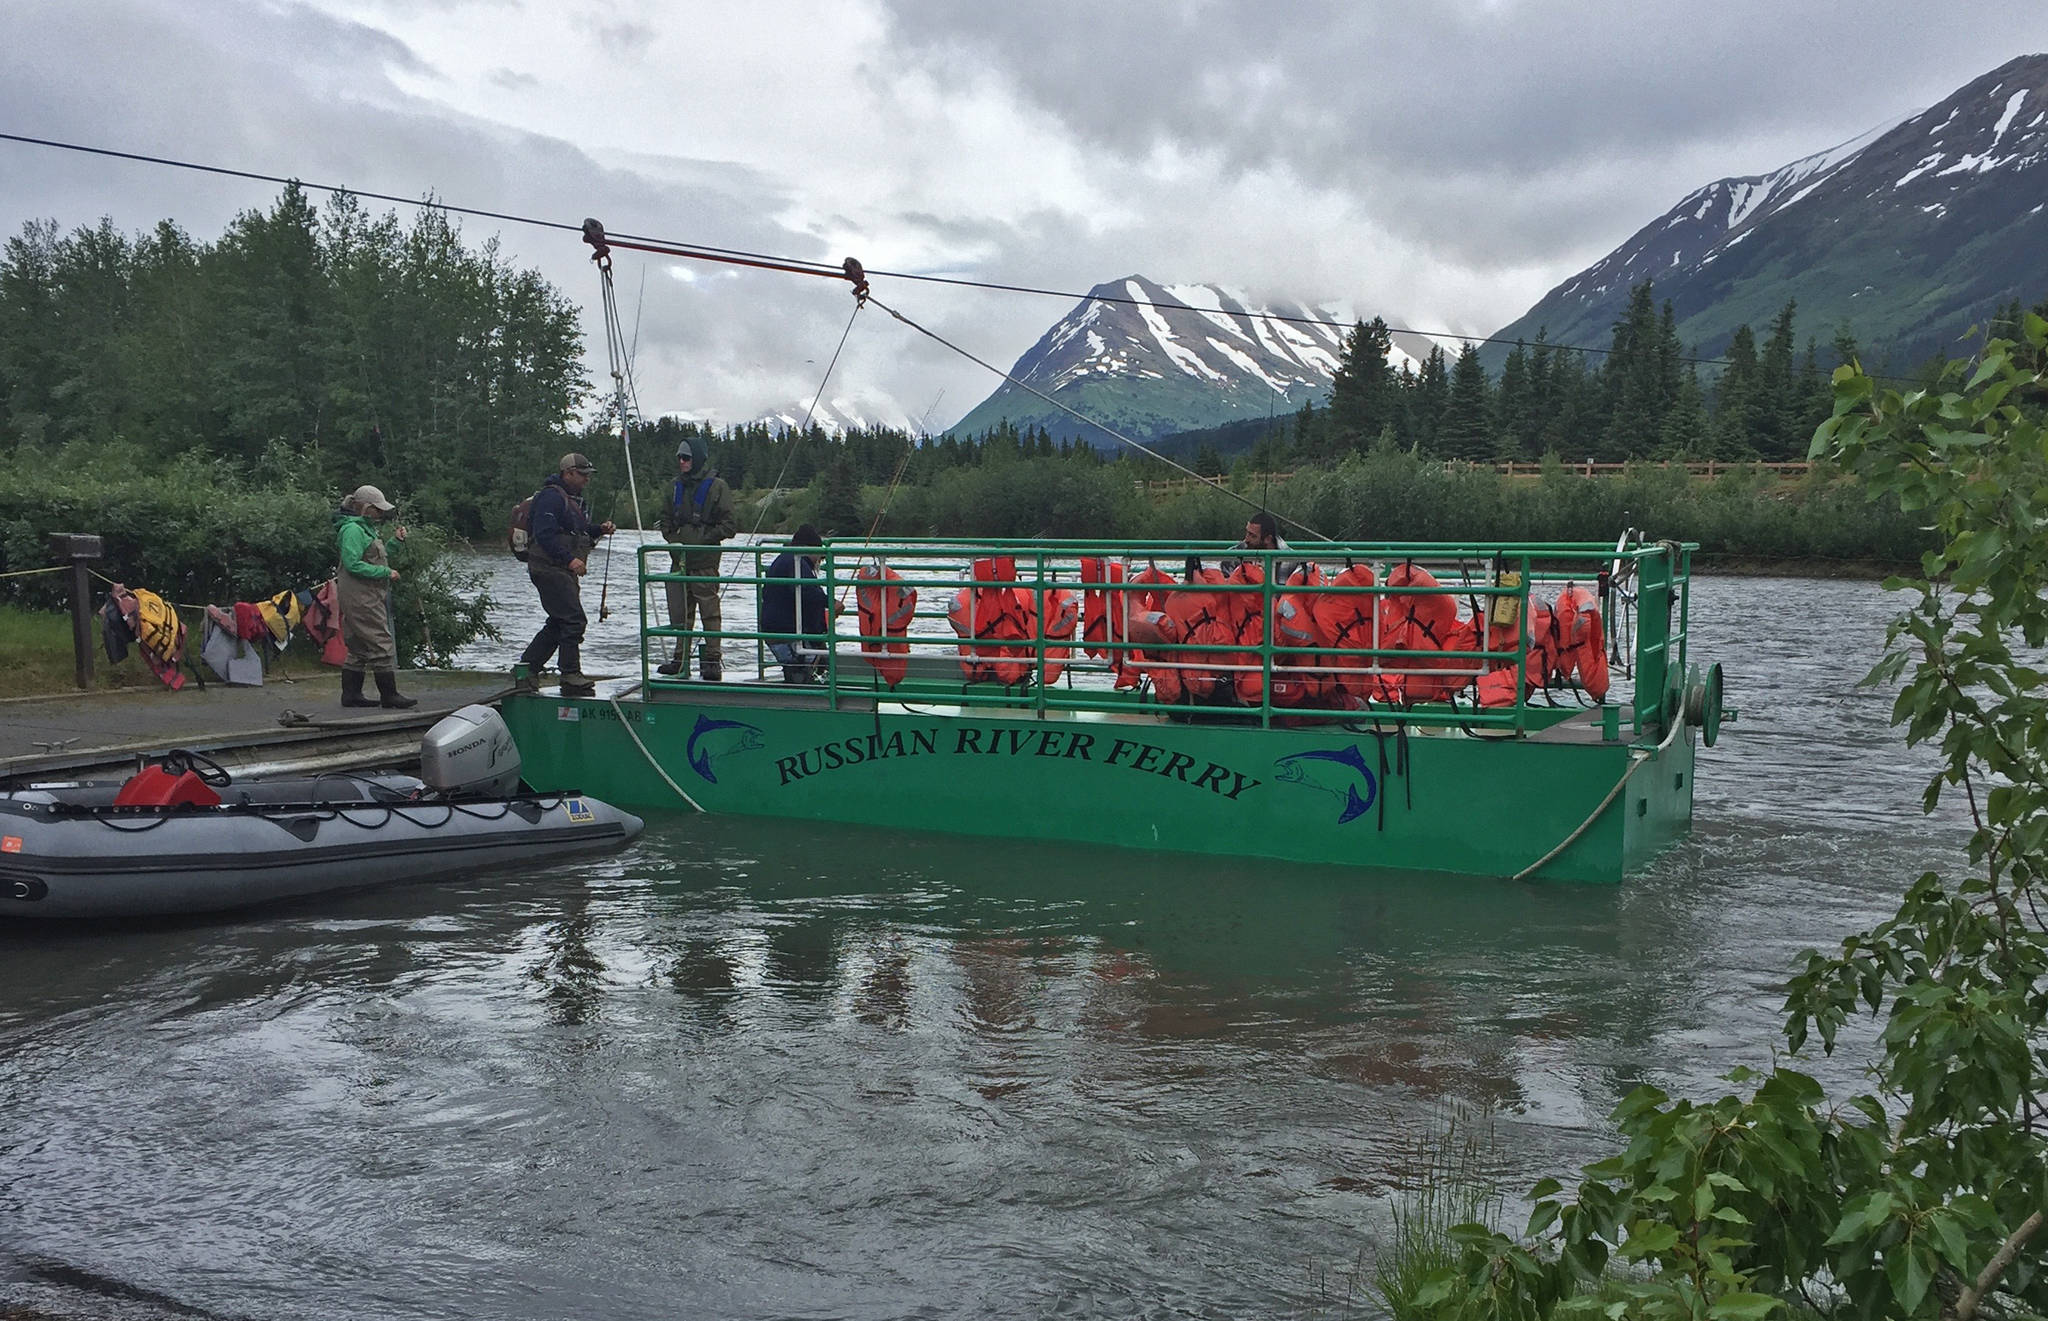 Anglers board the Russian River Ferry on the Kenai River just downstream of the confluence with the Russian River on Monday near Cooper Landing. (Photo by Elizabeth Earl/Peninsula Clarion)